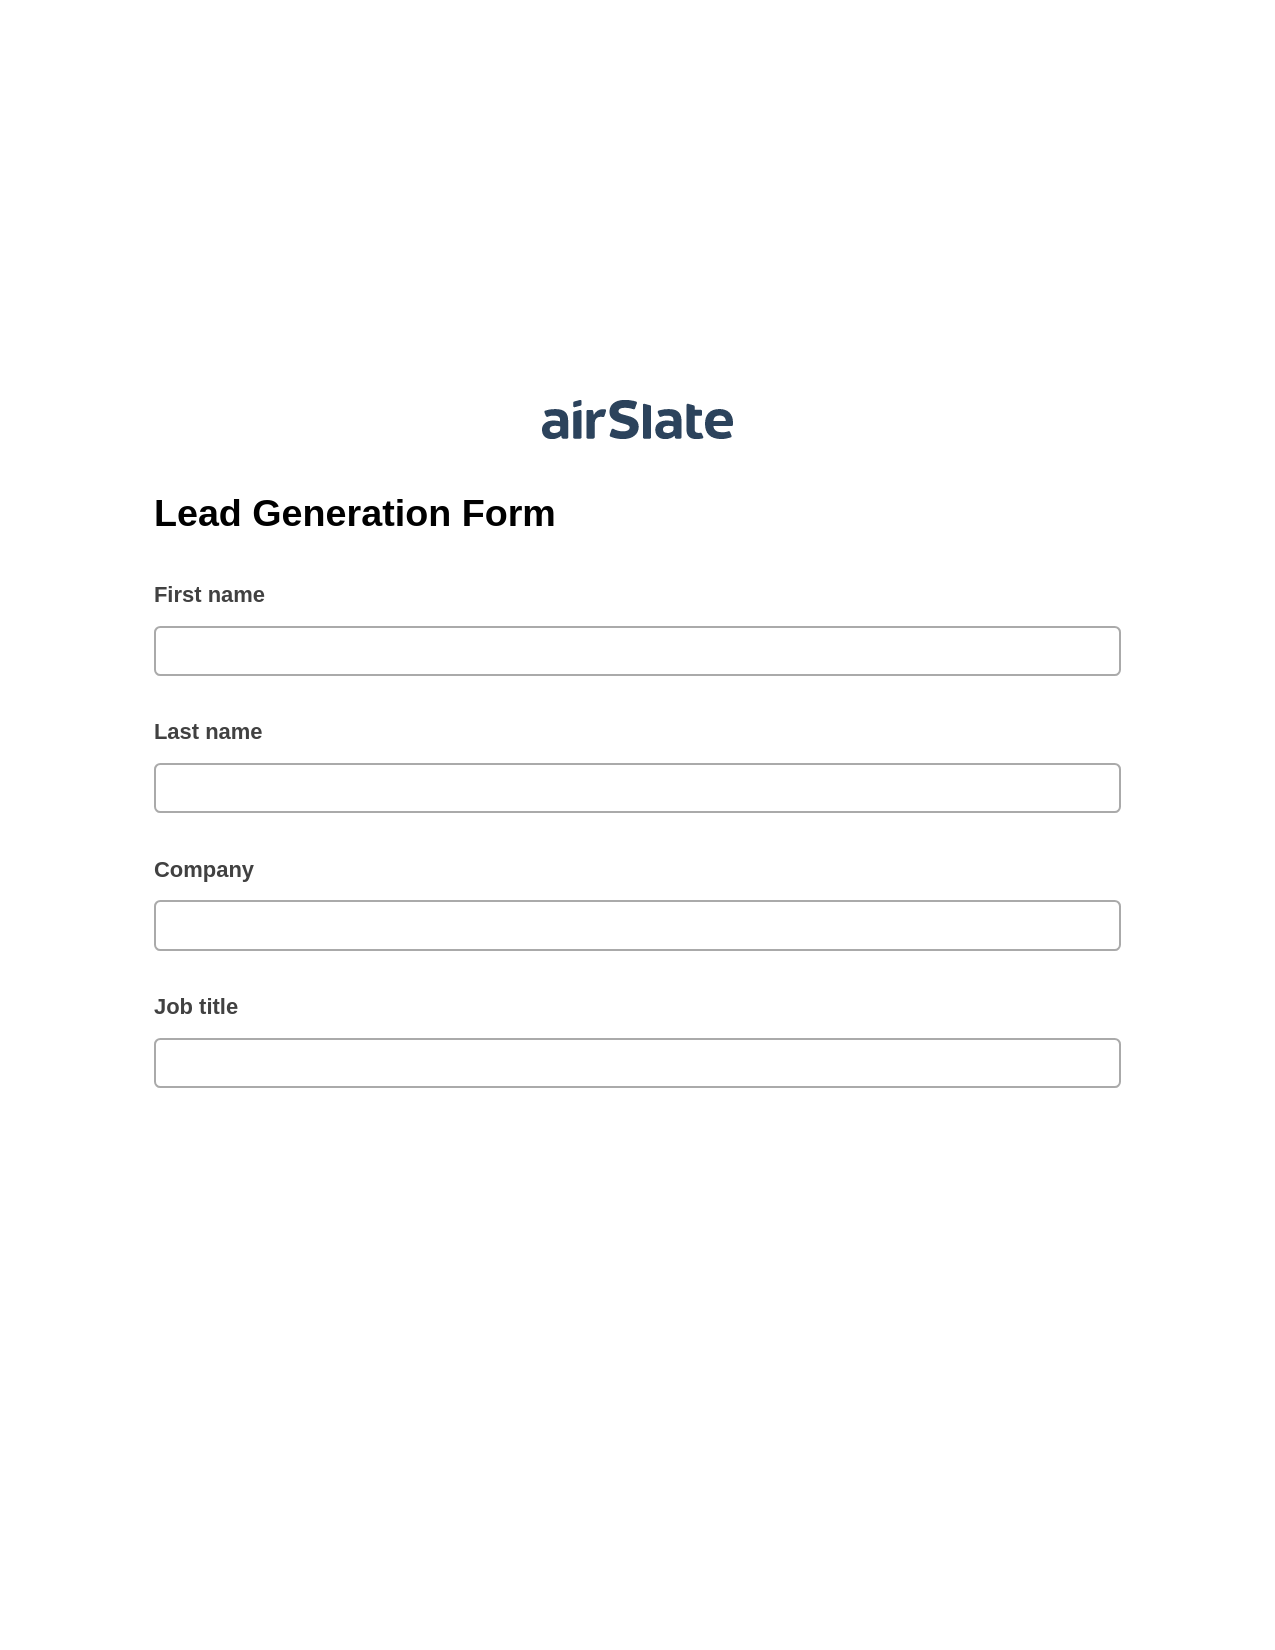 Lead Generation Form Prefill from NetSuite records, System Bot - Create a Slate in another Flow, Archive to SharePoint Folder Bot